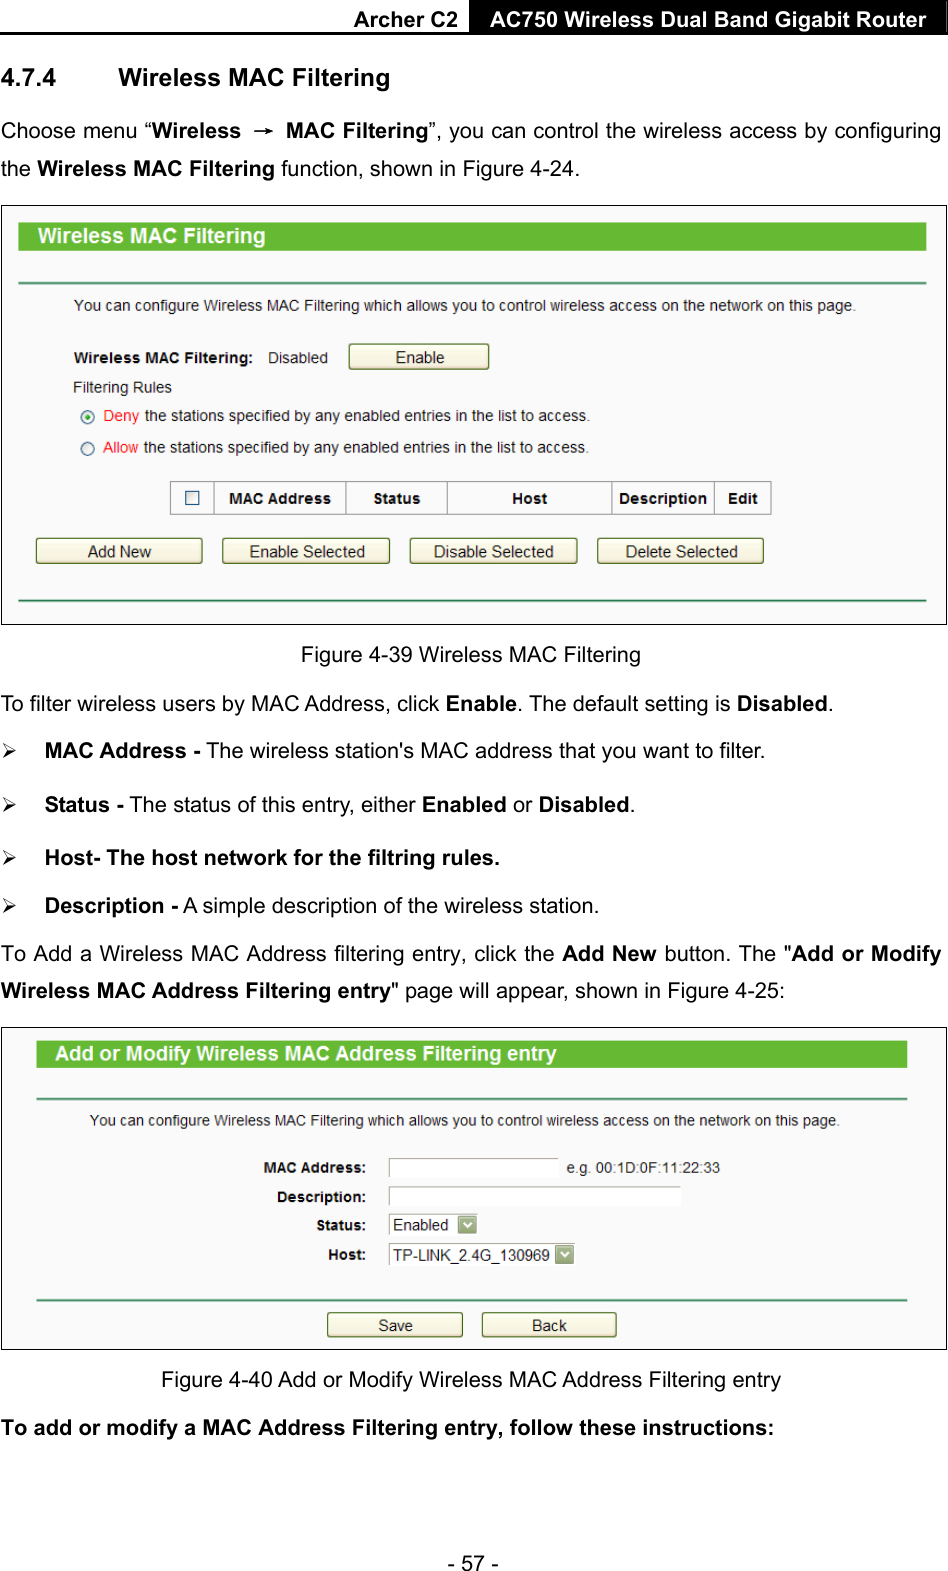 Archer C2 AC750 Wireless Dual Band Gigabit Router  - 57 - 4.7.4  Wireless MAC Filtering  Choose menu “Wireless  → MAC Filtering”, you can control the wireless access by configuring the Wireless MAC Filtering function, shown in Figure 4-24.  Figure 4-39 Wireless MAC Filtering To filter wireless users by MAC Address, click Enable. The default setting is Disabled.  MAC Address - The wireless station&apos;s MAC address that you want to filter.    Status - The status of this entry, either Enabled or Disabled.  Host- The host network for the filtring rules.  Description - A simple description of the wireless station.   To Add a Wireless MAC Address filtering entry, click the Add New button. The &quot;Add or Modify Wireless MAC Address Filtering entry&quot; page will appear, shown in Figure 4-25:  Figure 4-40 Add or Modify Wireless MAC Address Filtering entry To add or modify a MAC Address Filtering entry, follow these instructions: 